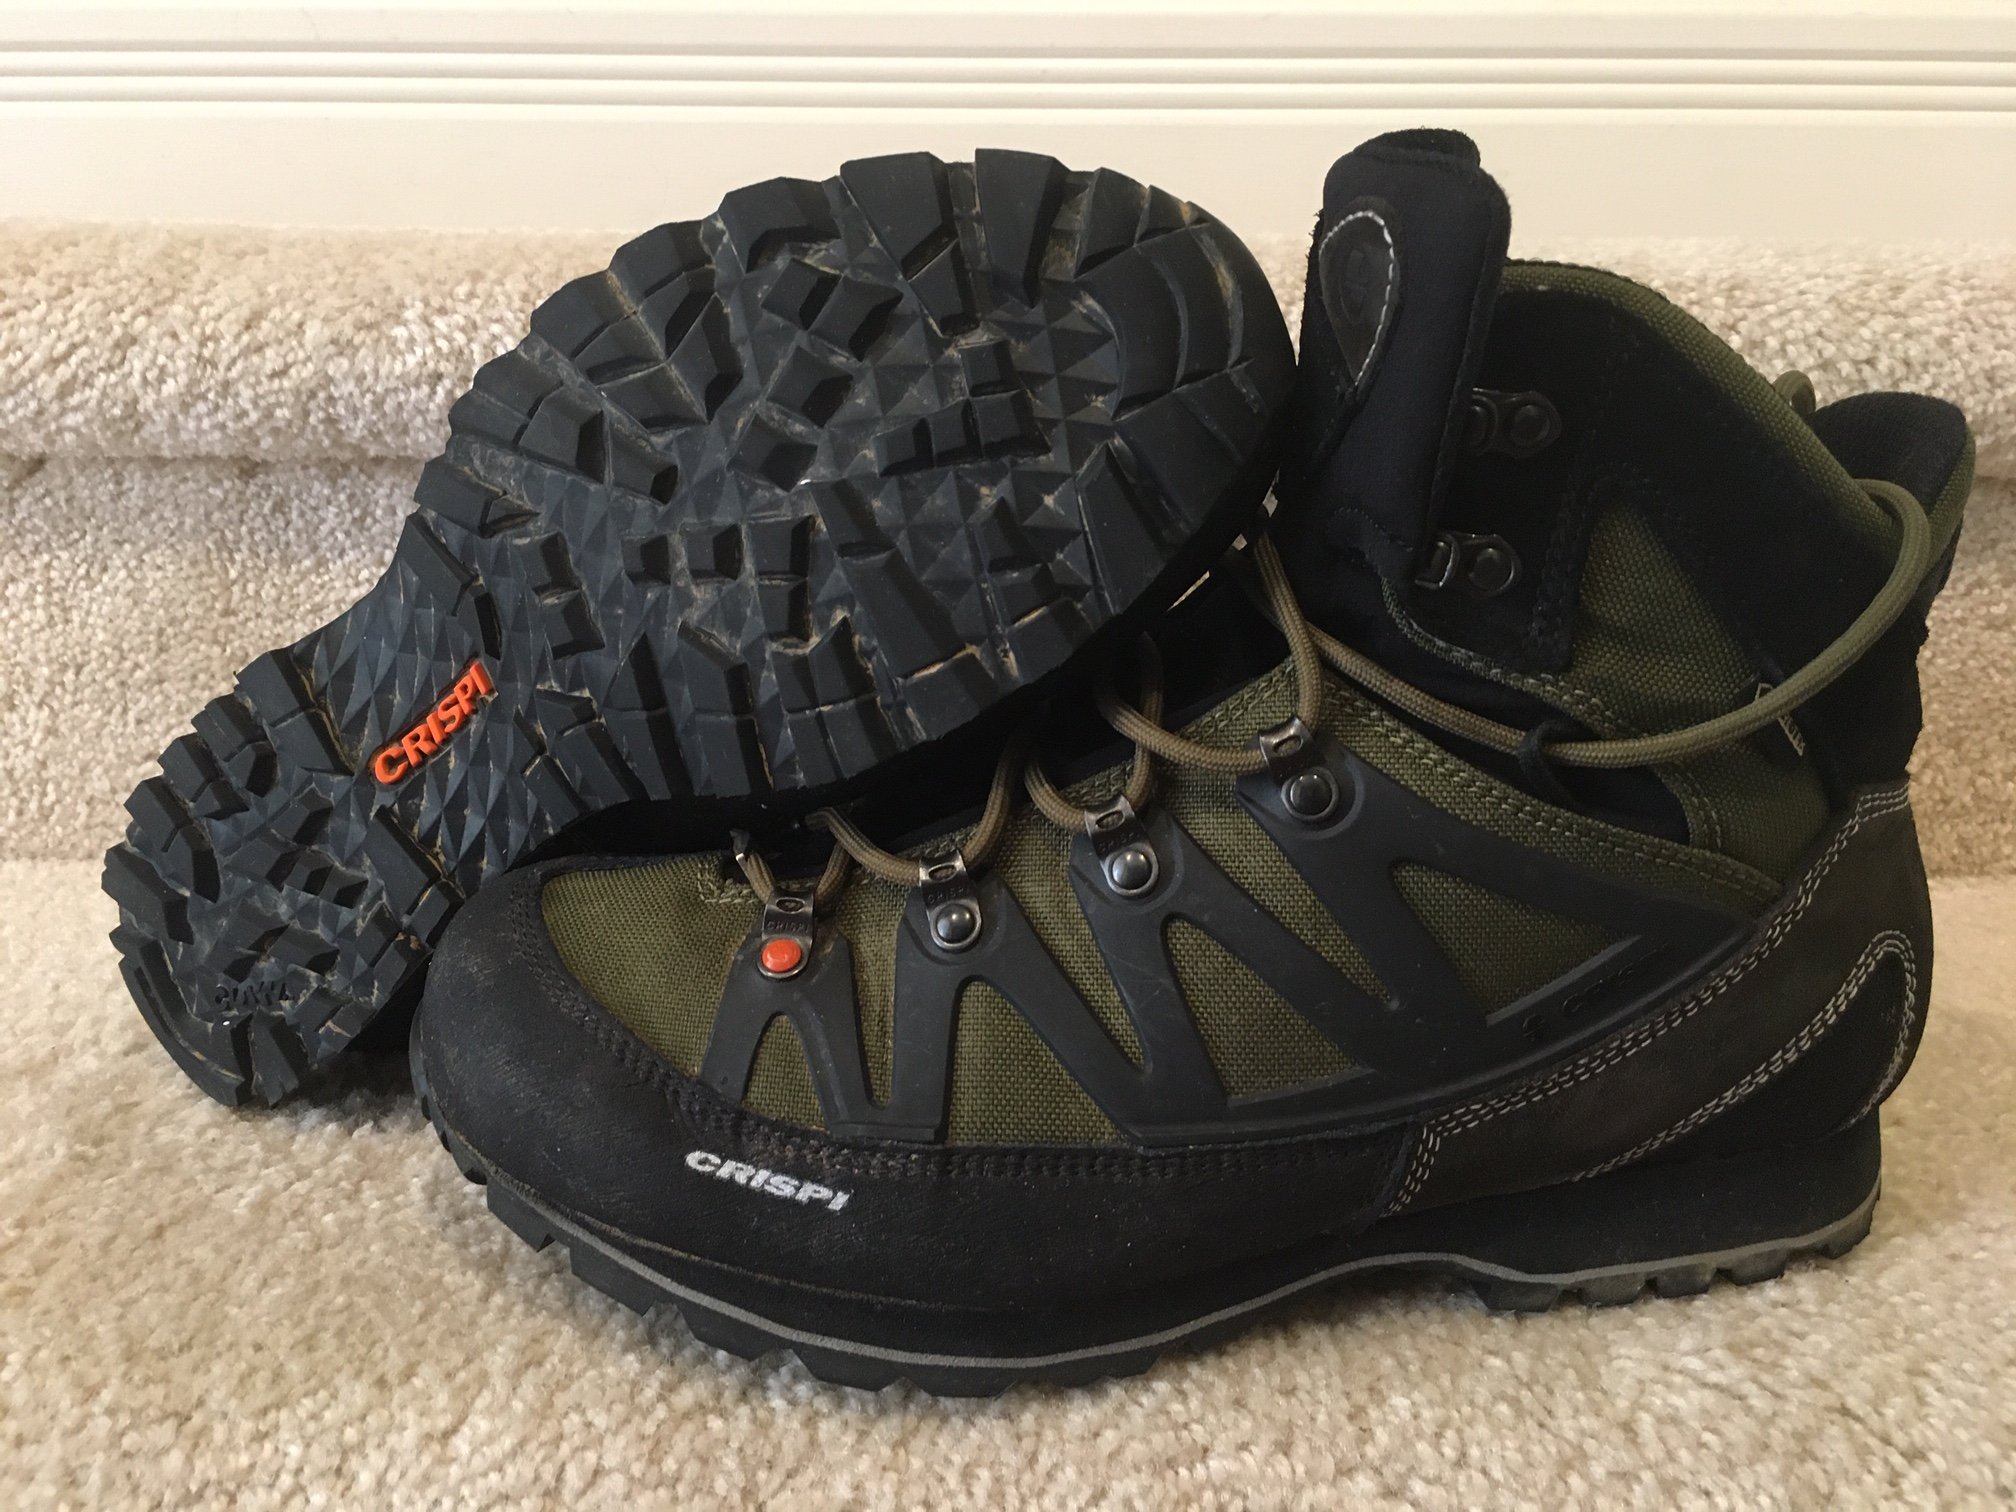 Crispi Thor and Scarpa Boots for Sale 